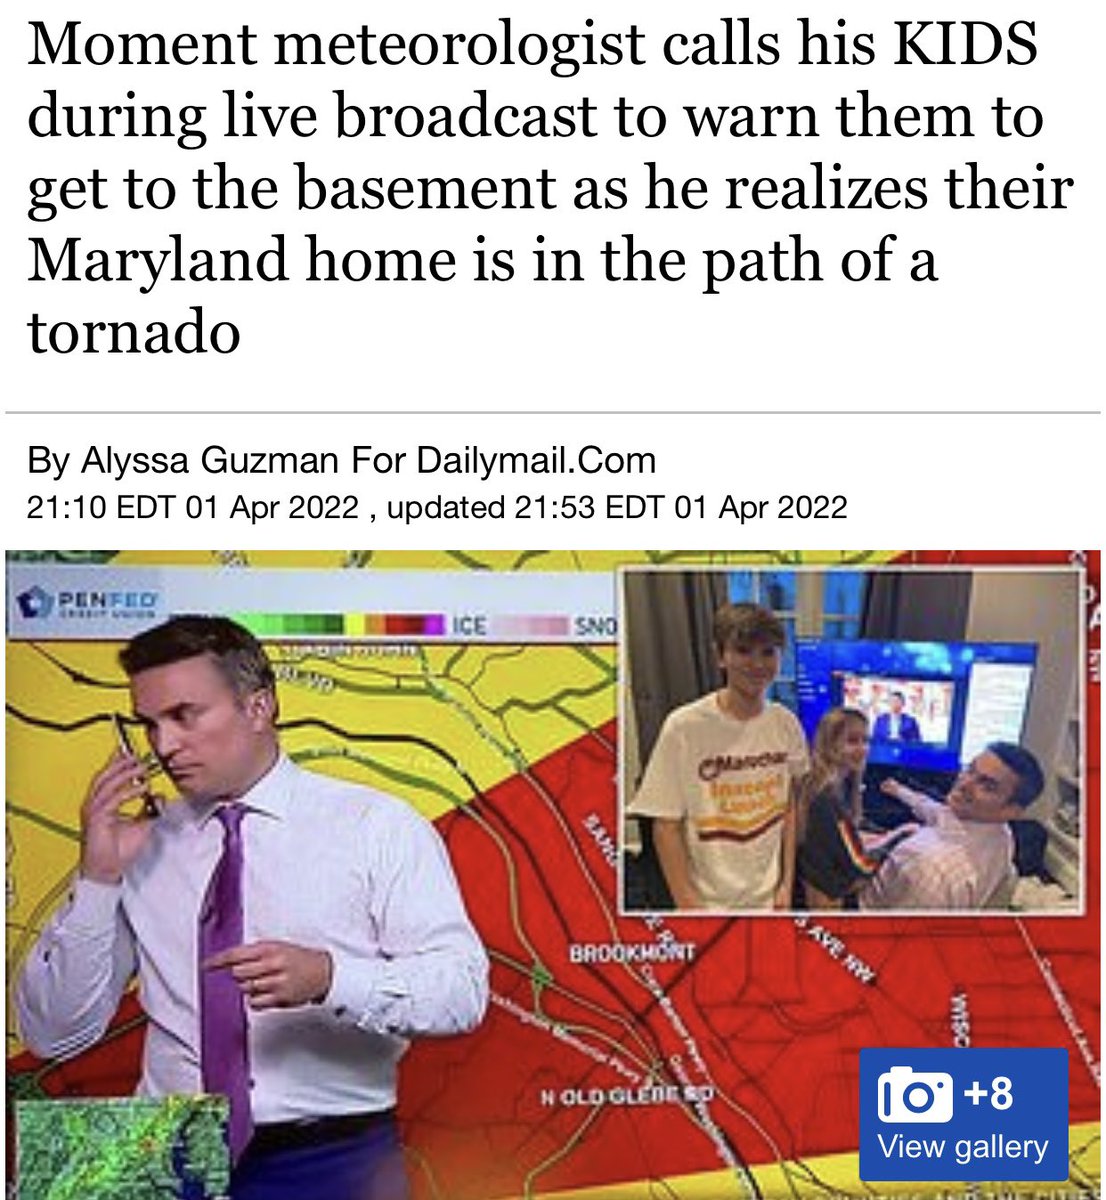 dudes posting wins - quotes - Moment meteorologist calls his Kids during live broadcast to warn them to get to the basement as he realizes their Maryland home is in the path of a tornado By Alyssa Guzman For Dailymail.Com Edt , updated Edt Penfio Lice Sno